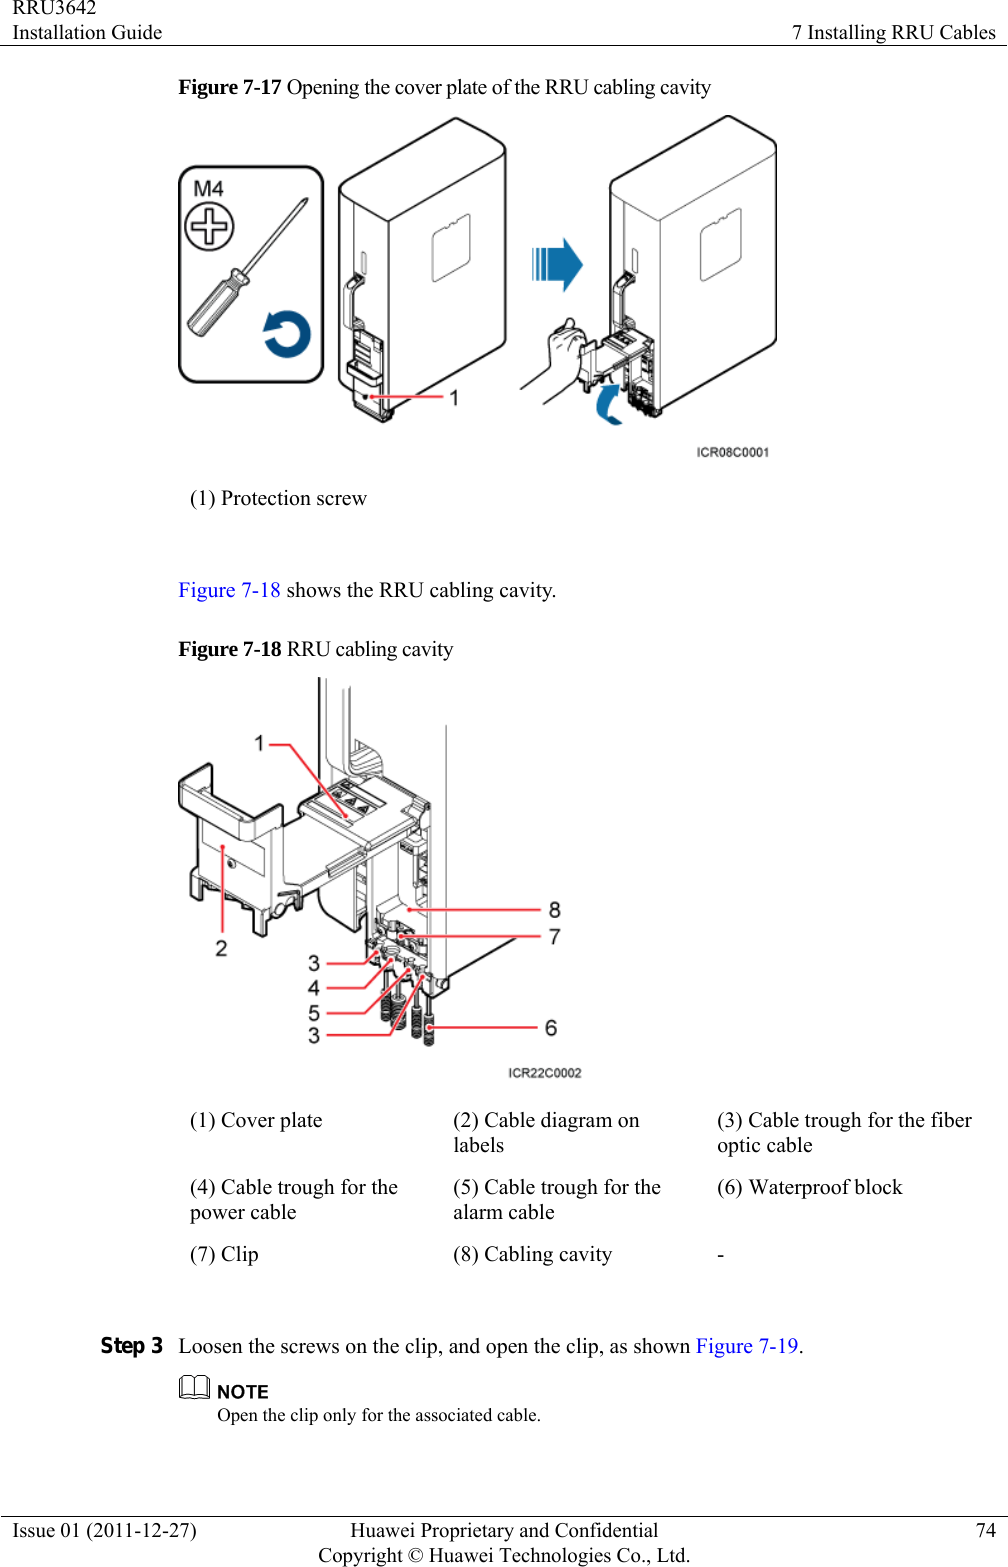 RRU3642 Installation Guide  7 Installing RRU Cables Issue 01 (2011-12-27)  Huawei Proprietary and Confidential         Copyright © Huawei Technologies Co., Ltd.74 Figure 7-17 Opening the cover plate of the RRU cabling cavity  (1) Protection screw  Figure 7-18 shows the RRU cabling cavity. Figure 7-18 RRU cabling cavity    (1) Cover plate  (2) Cable diagram on labels (3) Cable trough for the fiber optic cable (4) Cable trough for the power cable (5) Cable trough for the alarm cable (6) Waterproof block (7) Clip  (8) Cabling cavity  -  Step 3 Loosen the screws on the clip, and open the clip, as shown Figure 7-19.  Open the clip only for the associated cable. 